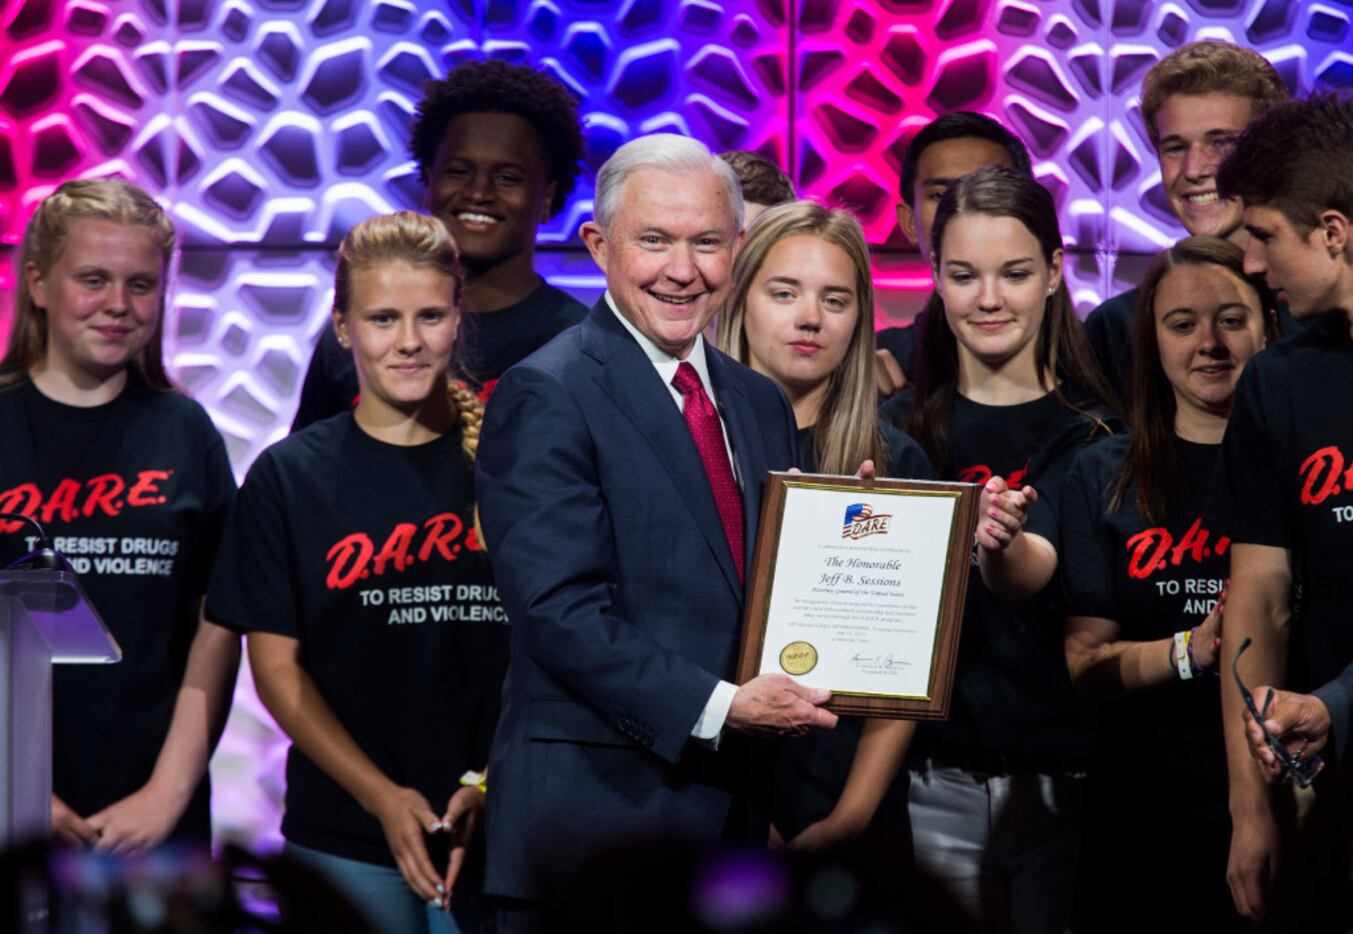 U.S. Attorney General Jeff Sessions is presented with a plaque from the DARE youth advocacy...